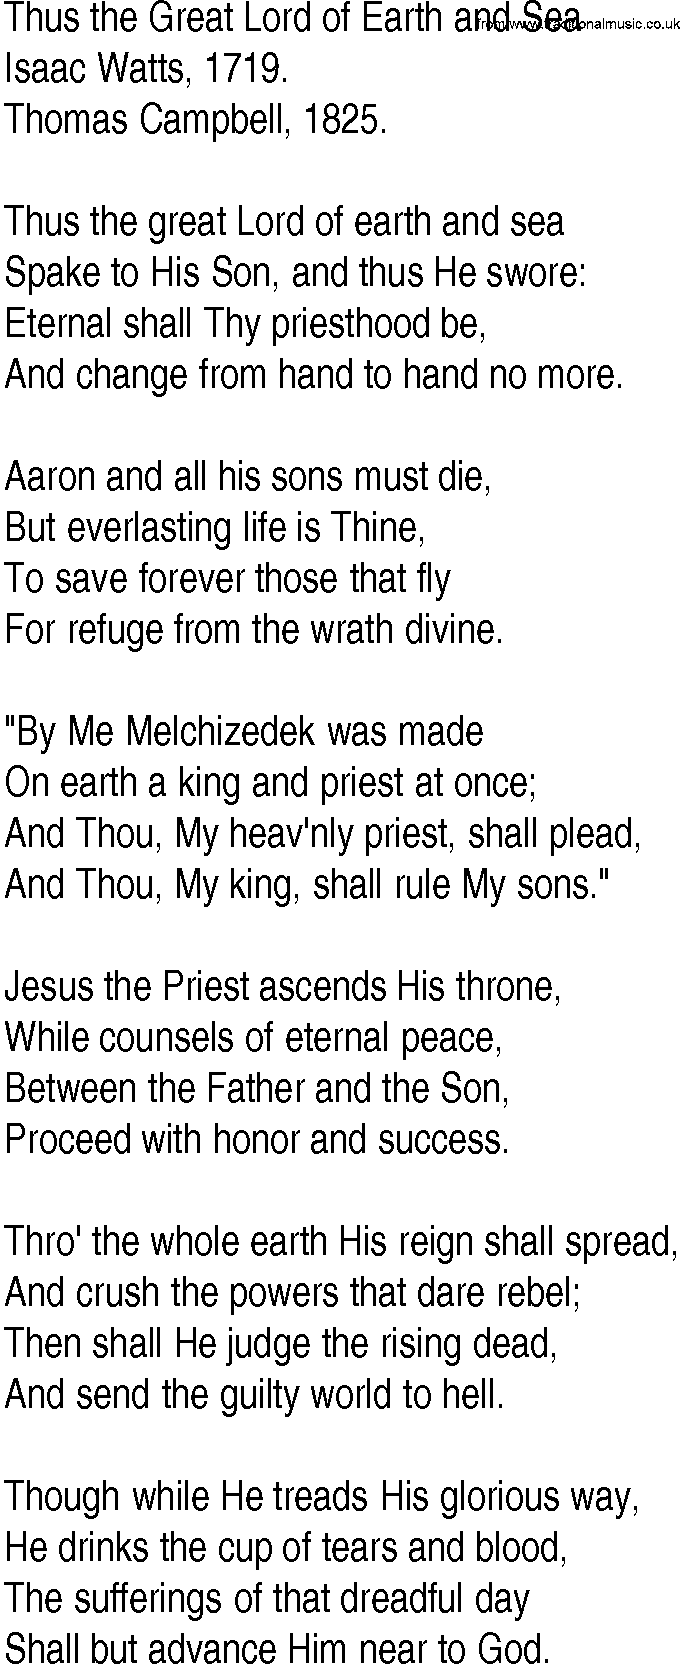 Hymn and Gospel Song: Thus the Great Lord of Earth and Sea by Isaac Watts lyrics